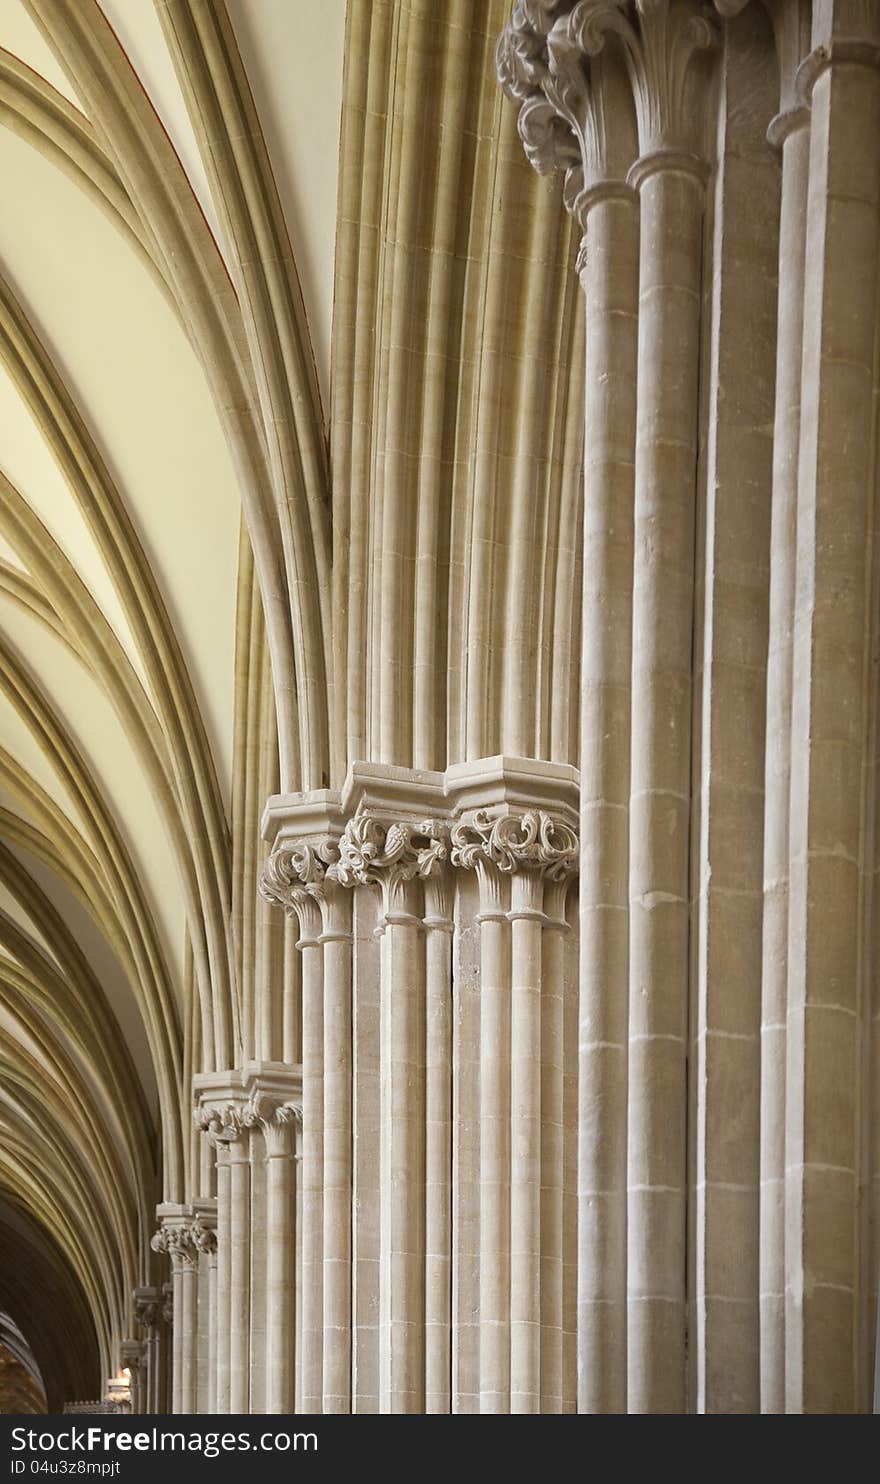 View of archways in Wells Cathedral, Somerset